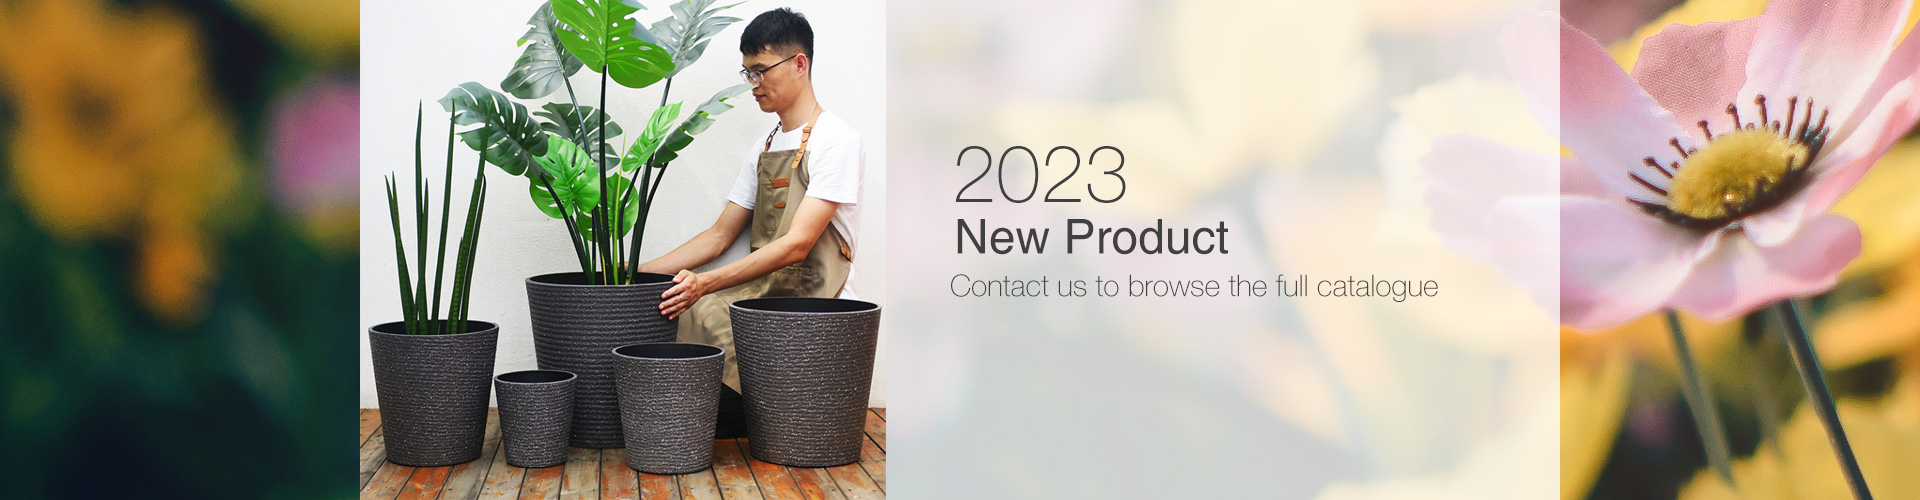 2023 New Product